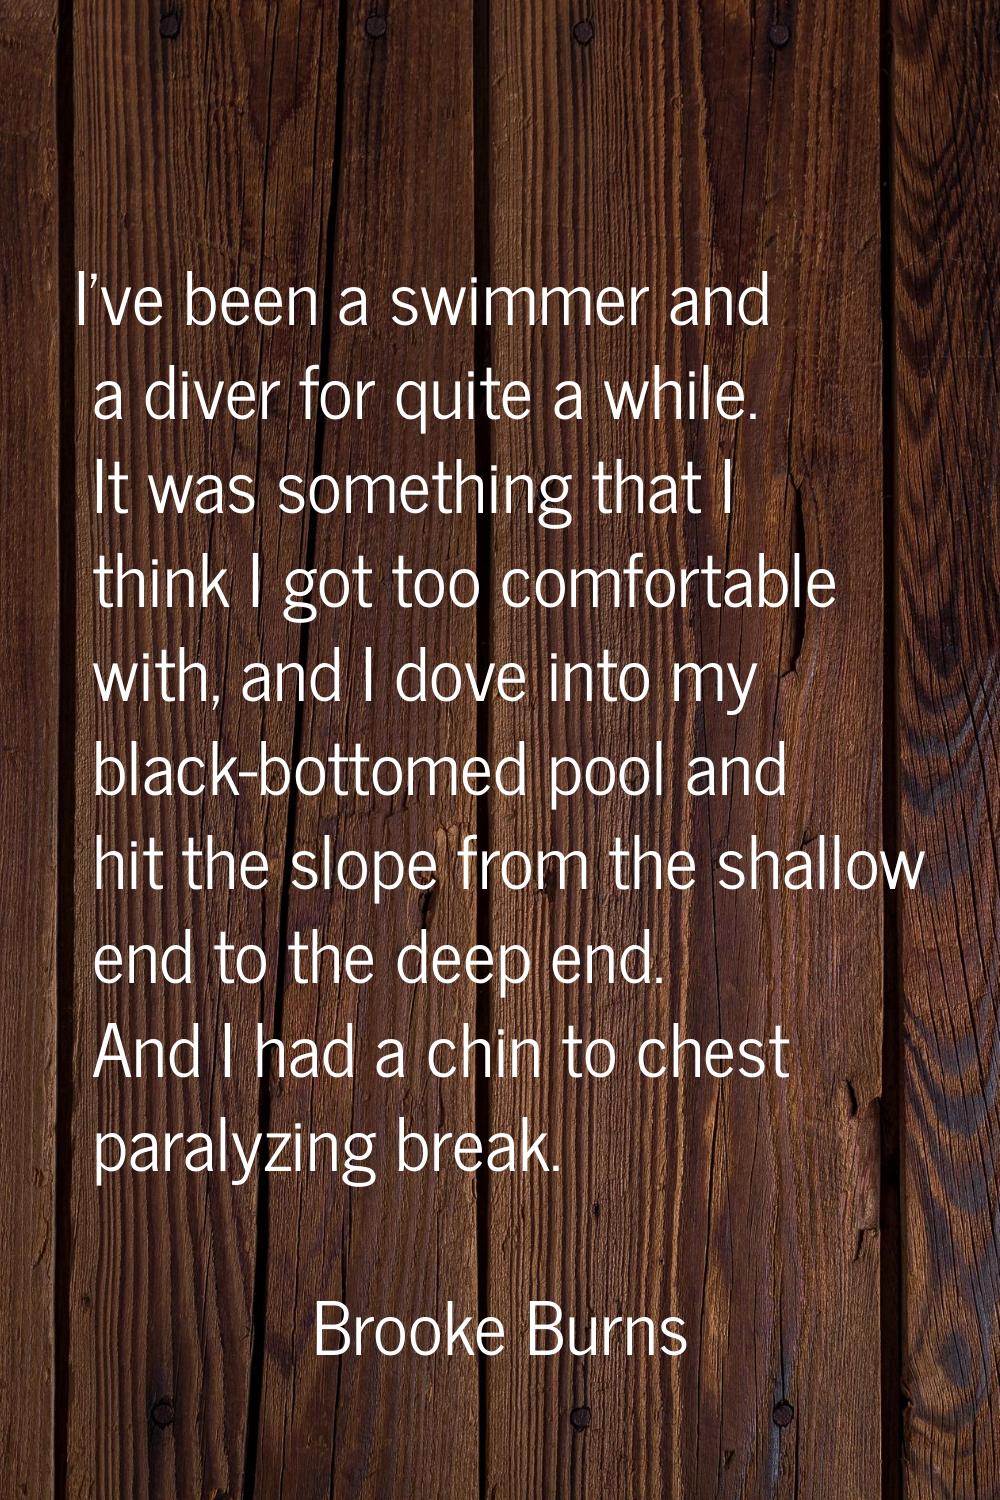 I've been a swimmer and a diver for quite a while. It was something that I think I got too comforta